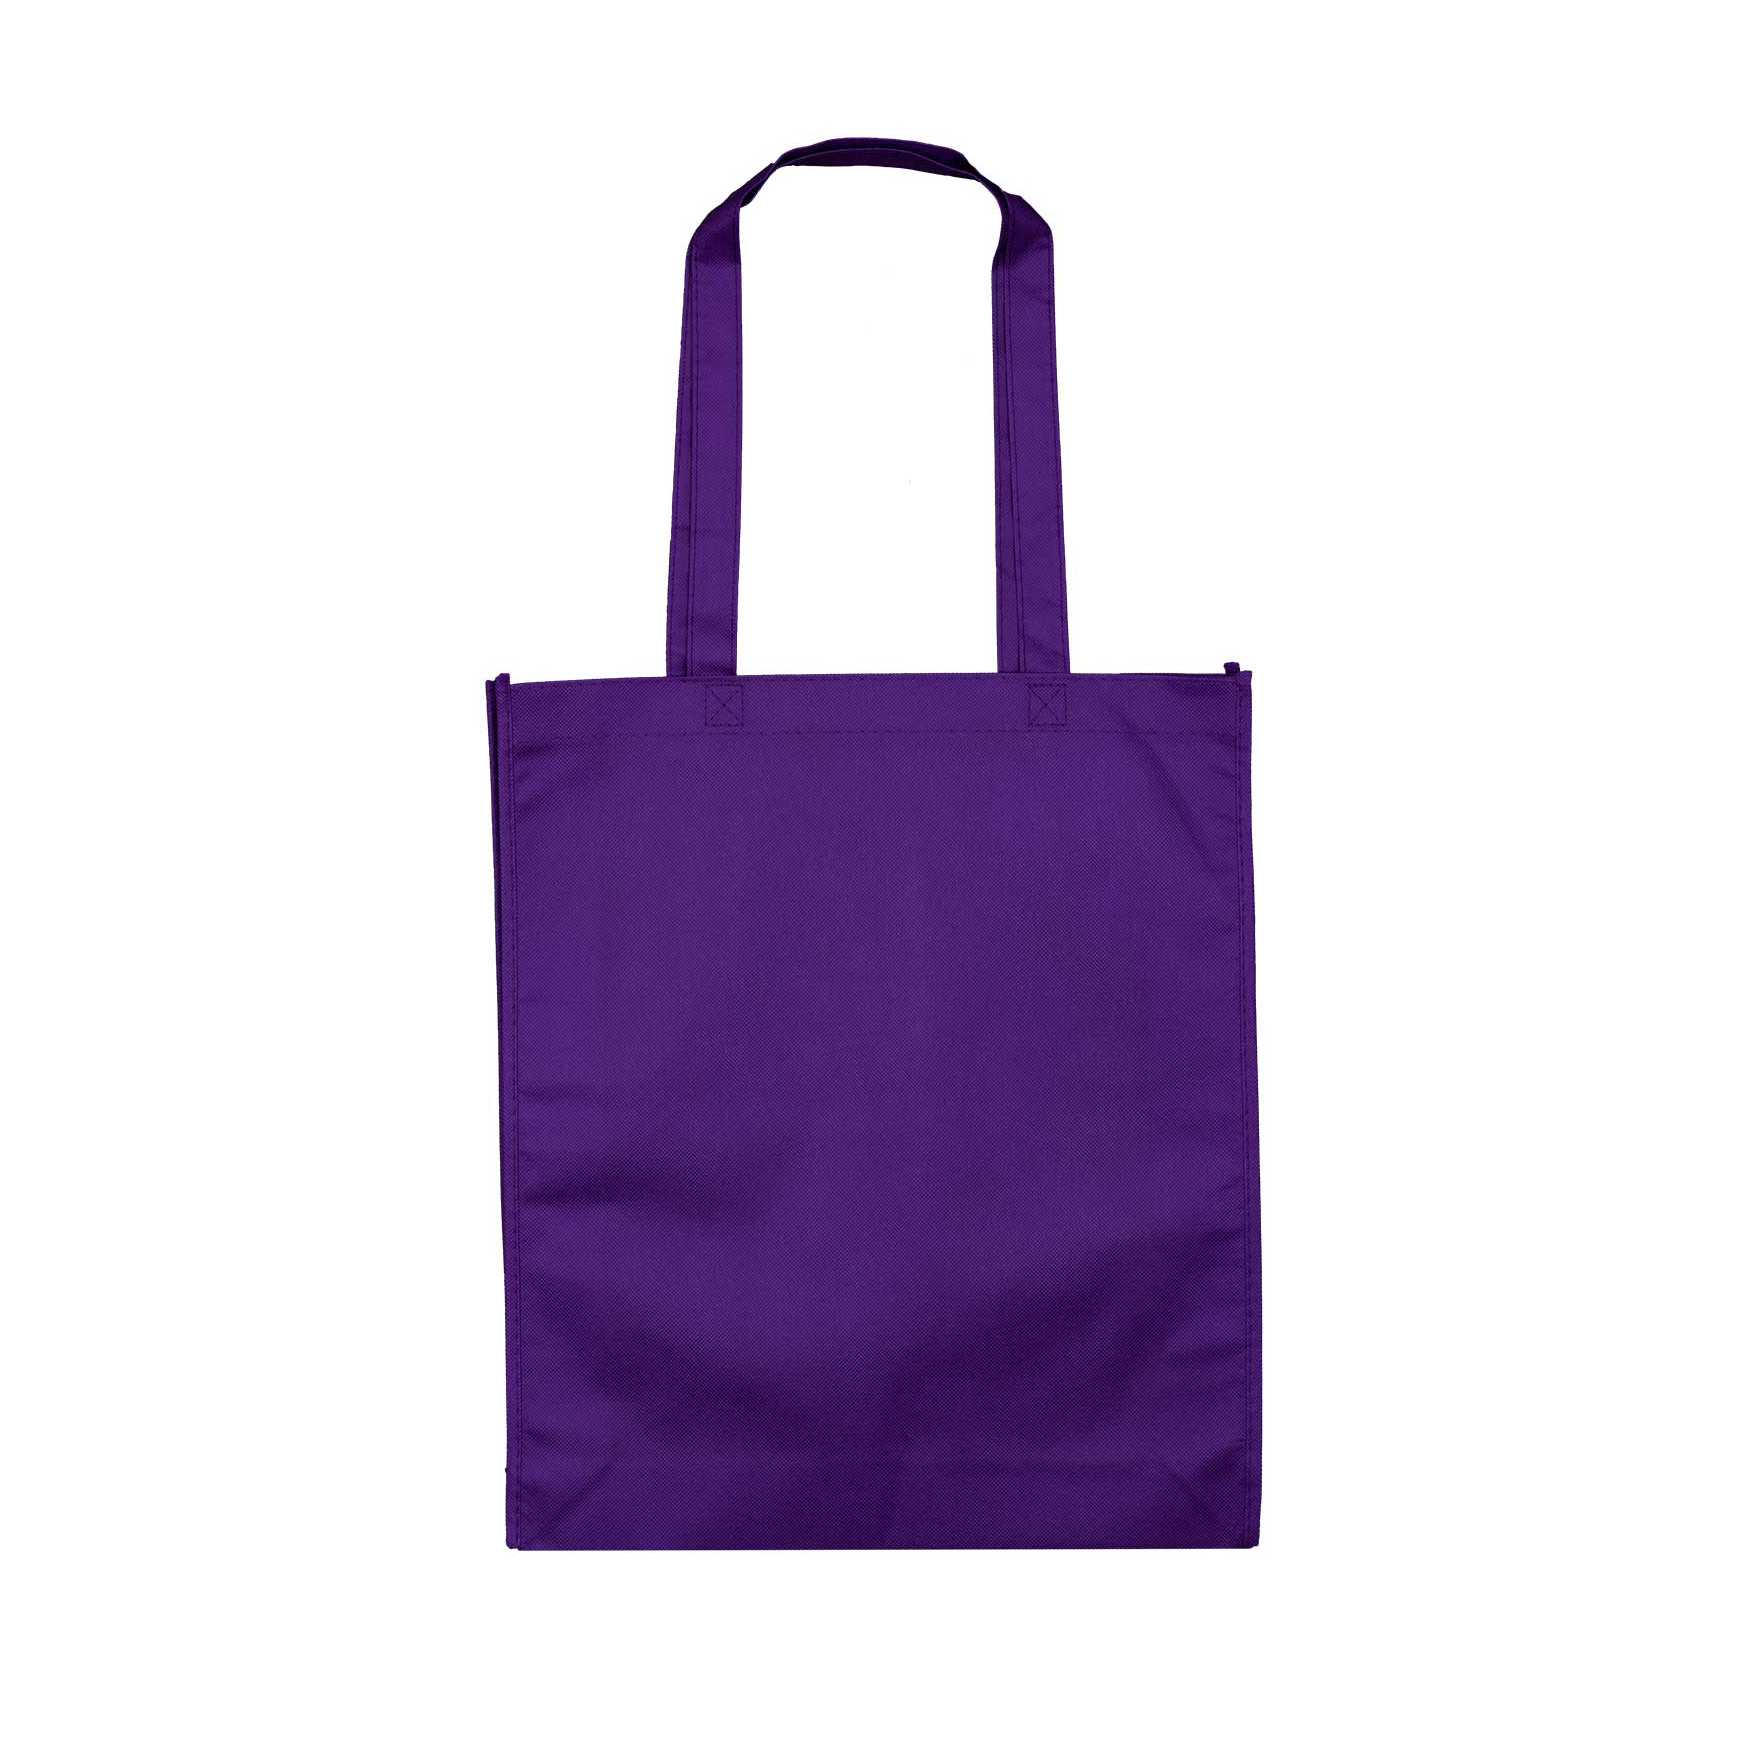 Custom Tote Bags: Personalized Reusable Shopping Bag | Paper Mart